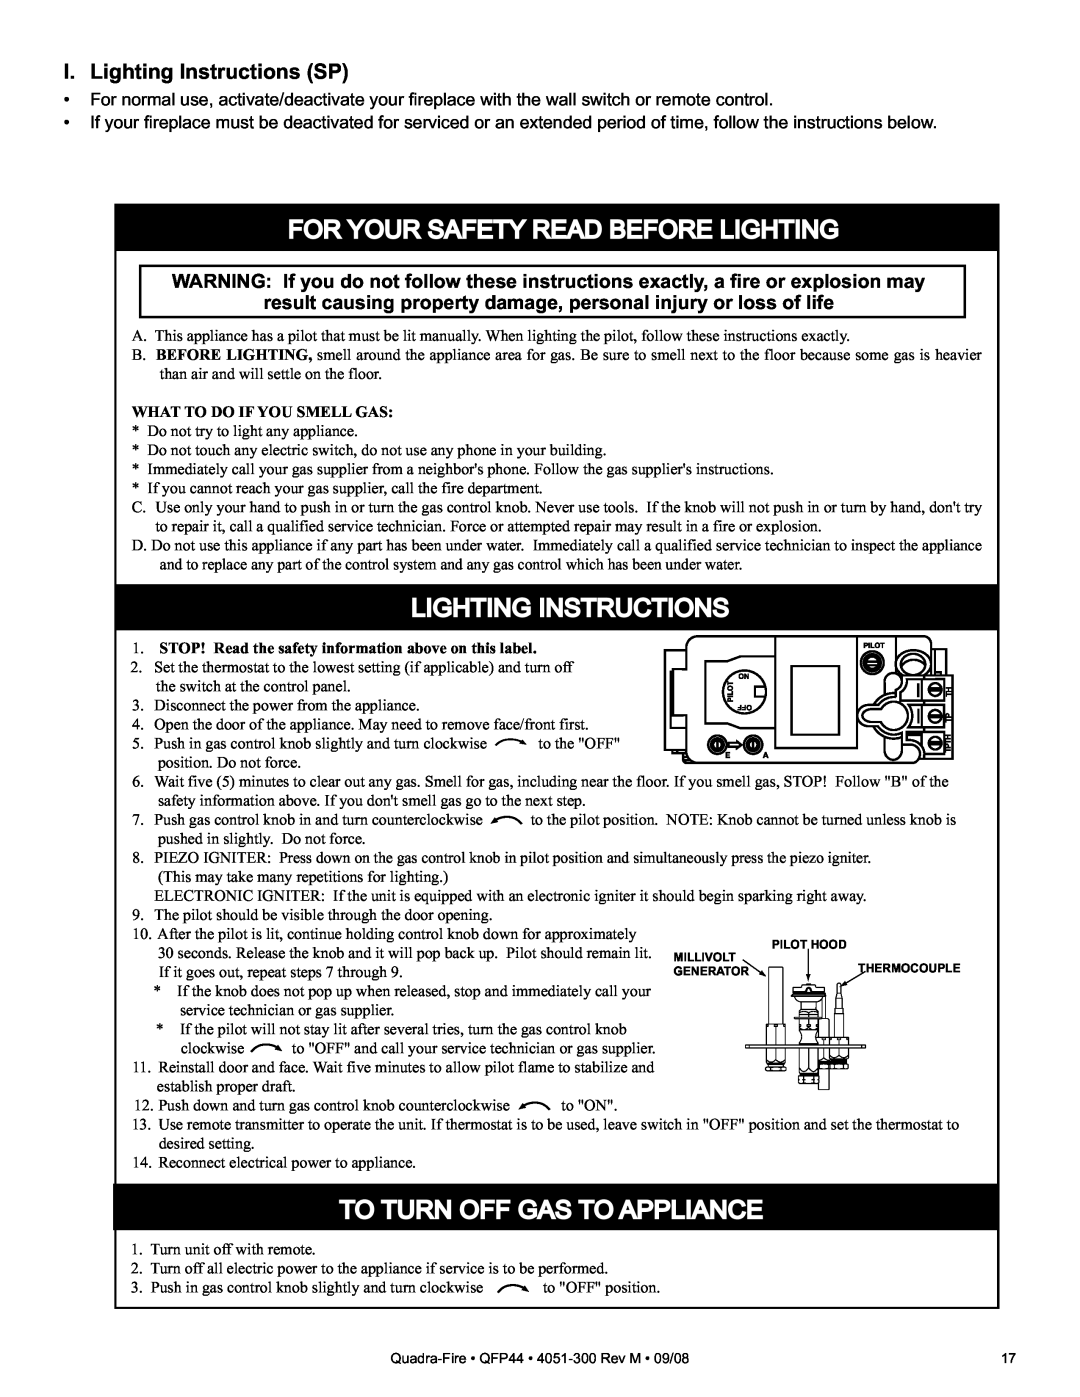 Quadra-Fire QFP44 owner manual I. Lighting Instructions SP, Foryour Safety Read Beforelighting, To Turn Offgas To Appliance 